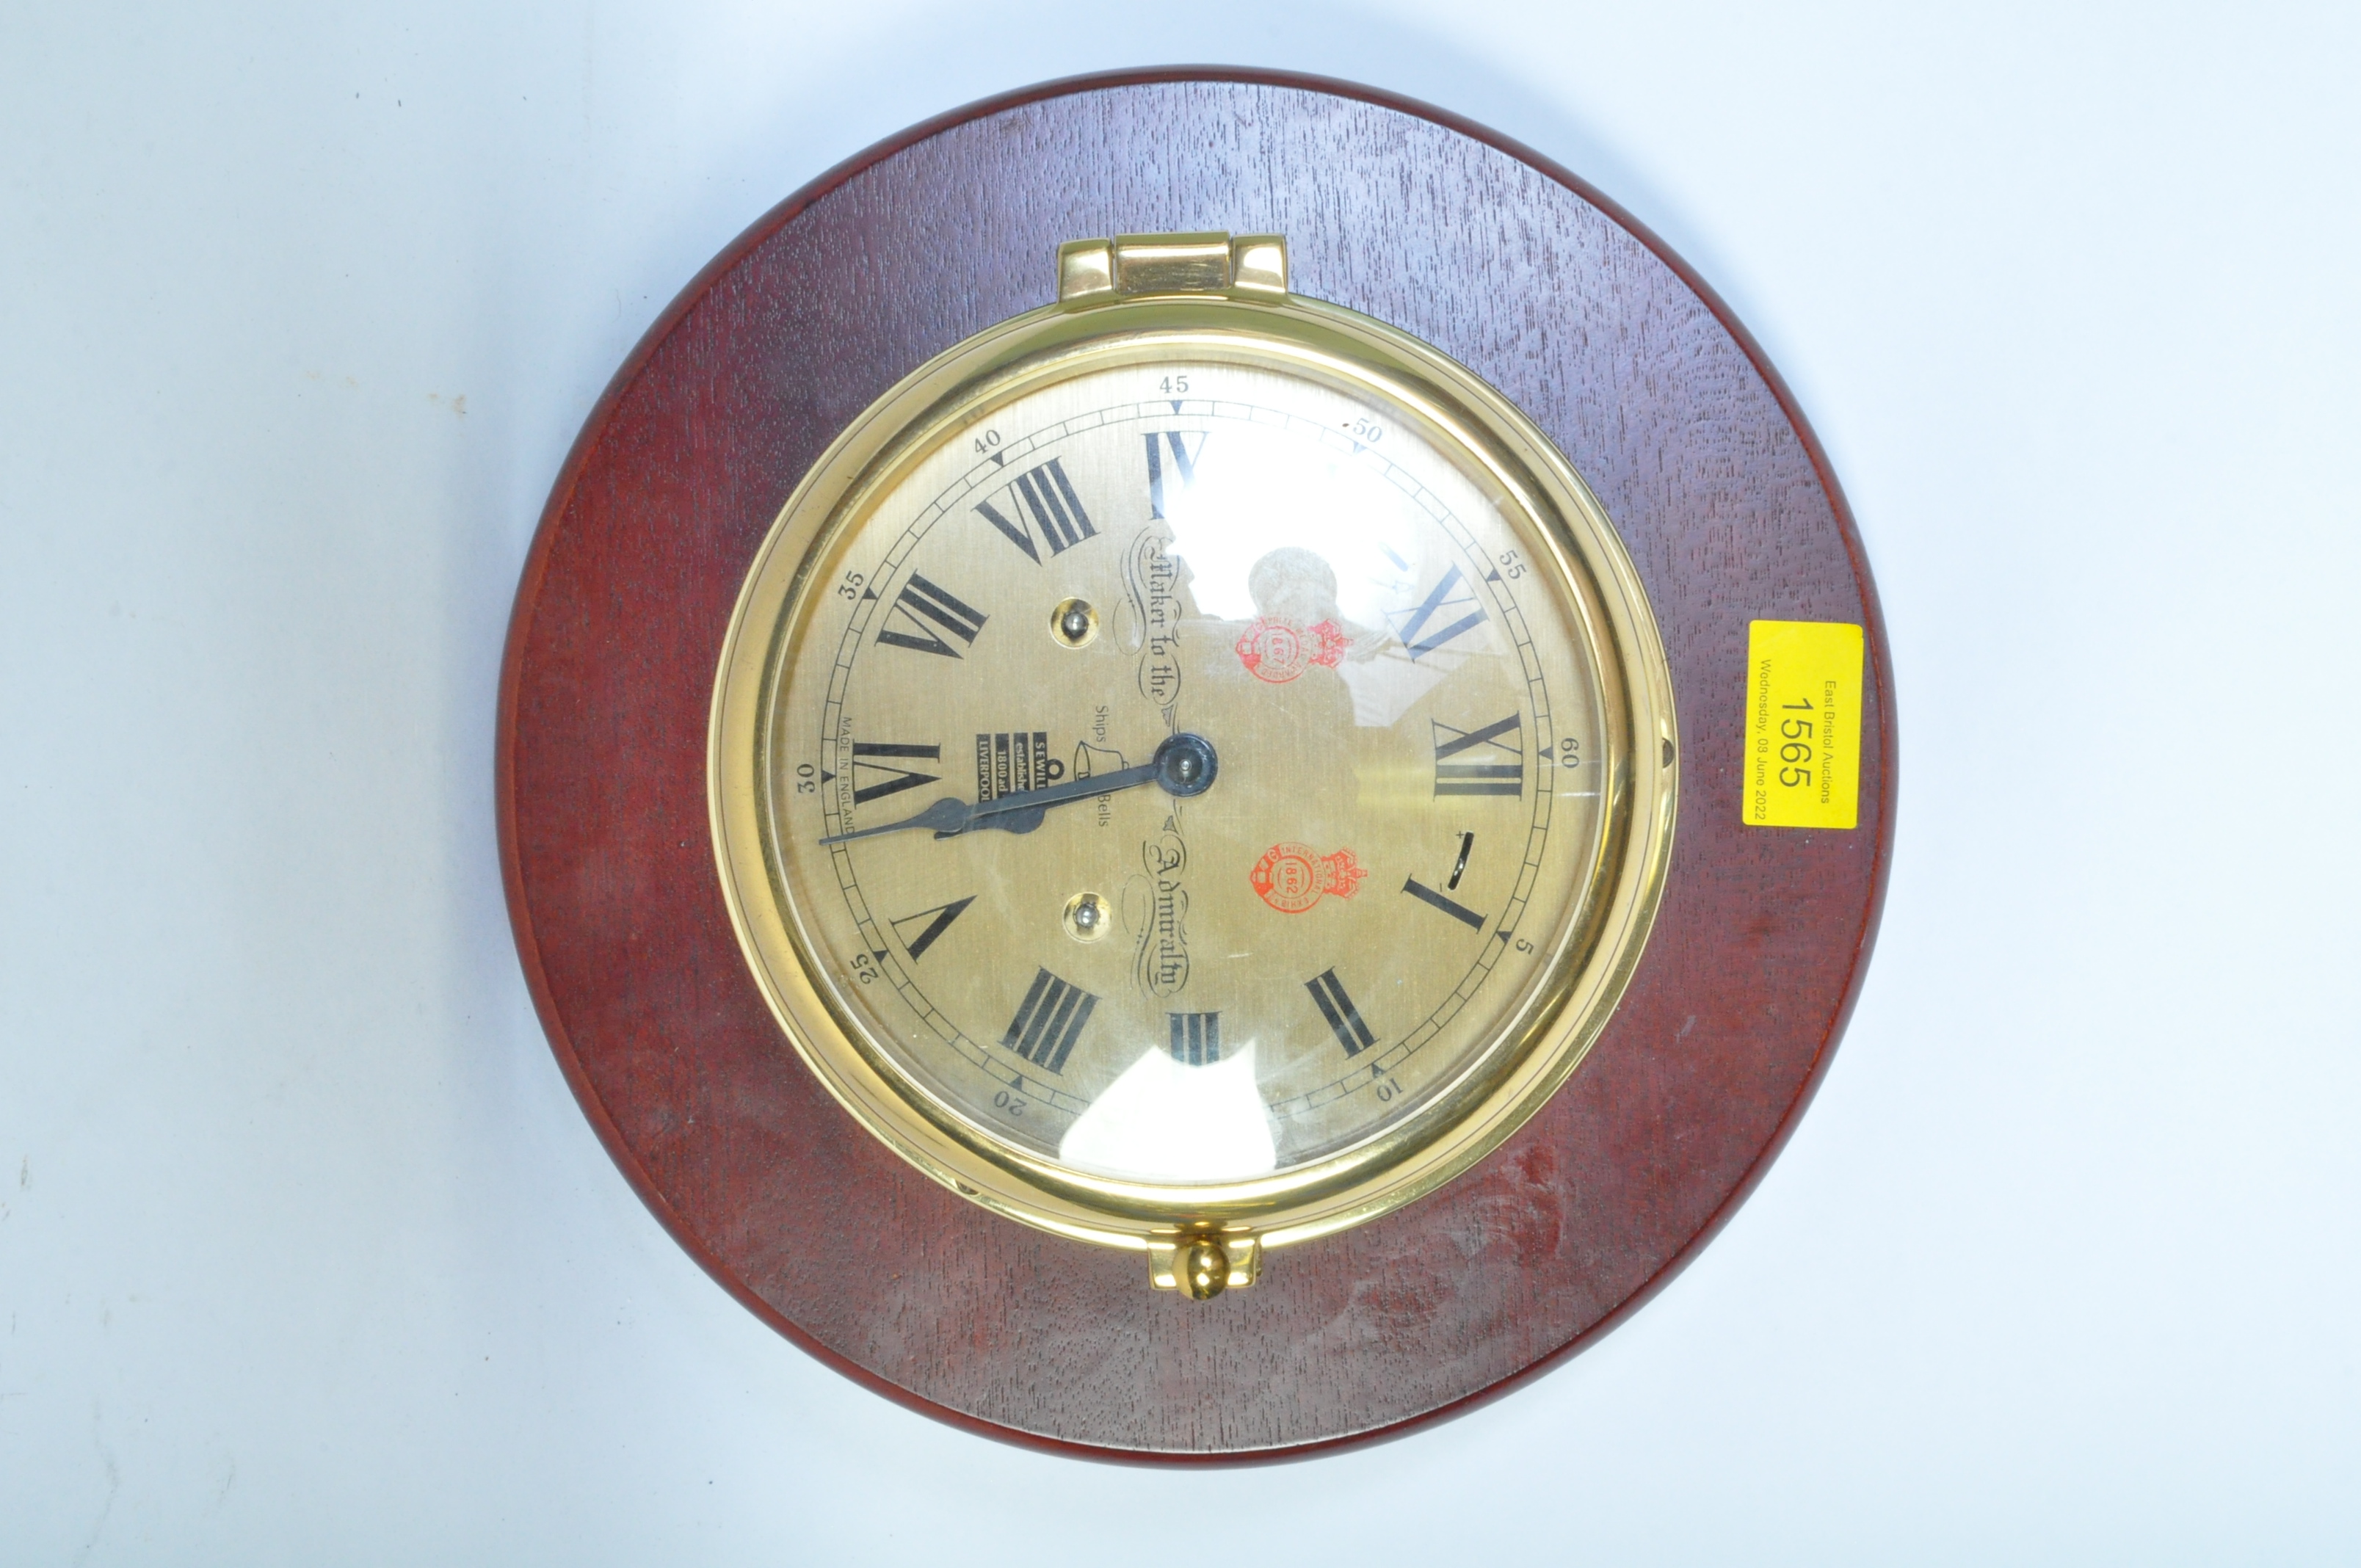 SEWILLS OF LIVERPOOL ROYAL ADMIRALTY SHIPS CLOCK - Image 5 of 6